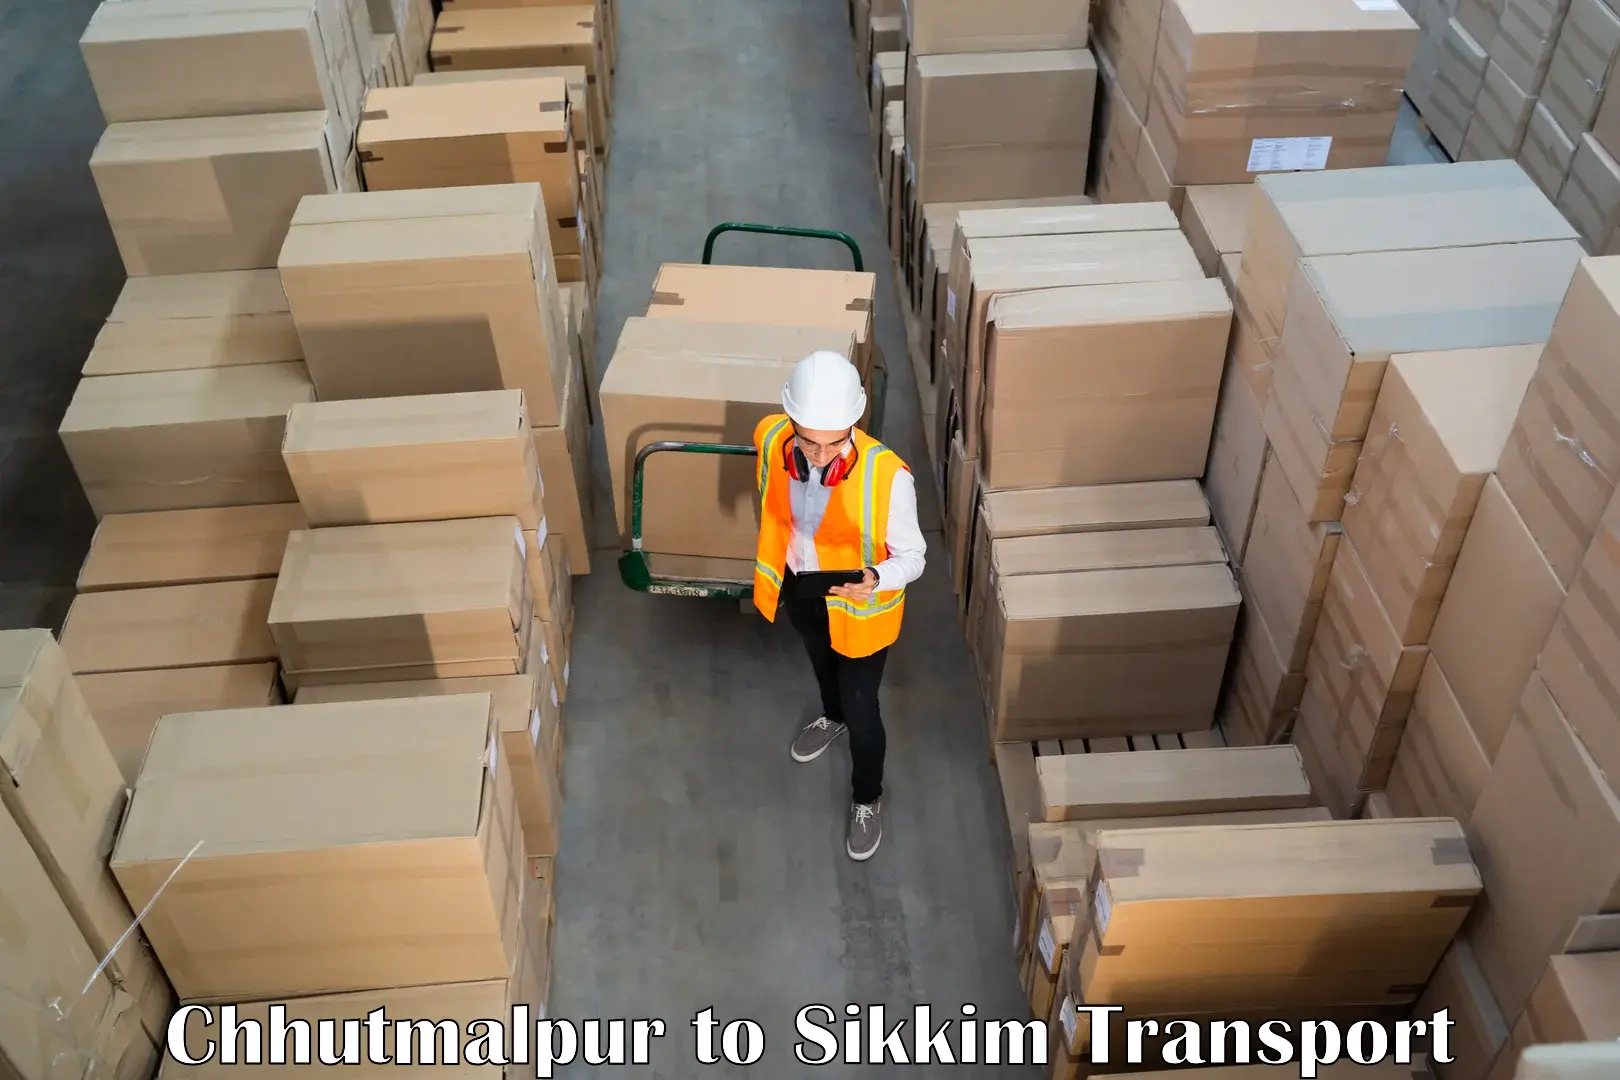 Delivery service Chhutmalpur to South Sikkim